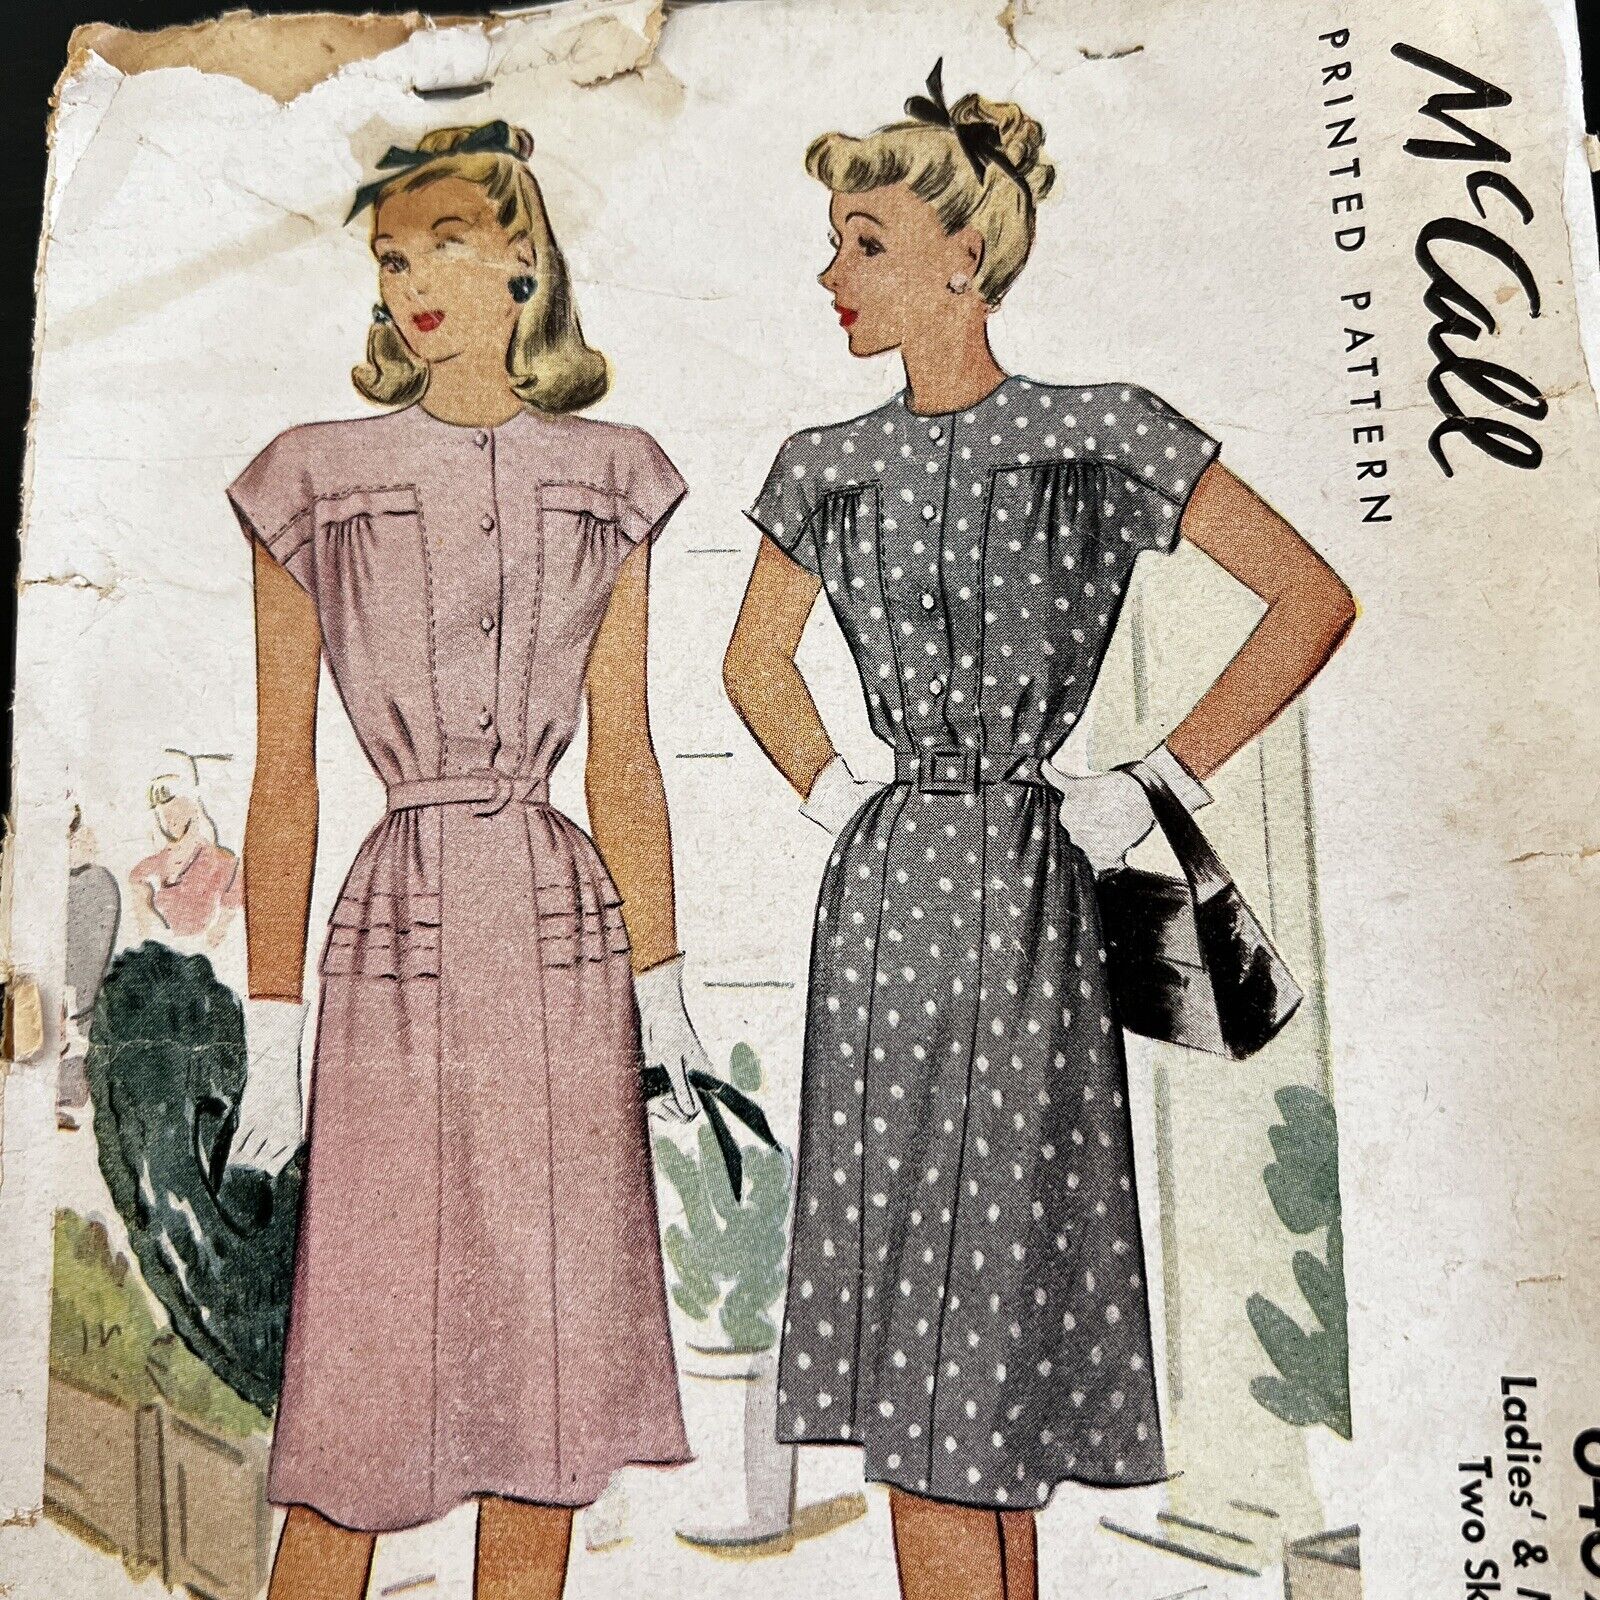 Vintage 1940s McCalls 6469 Tiered Peplum Tucked Dress Sewing Pattern 16 XS/S CUT